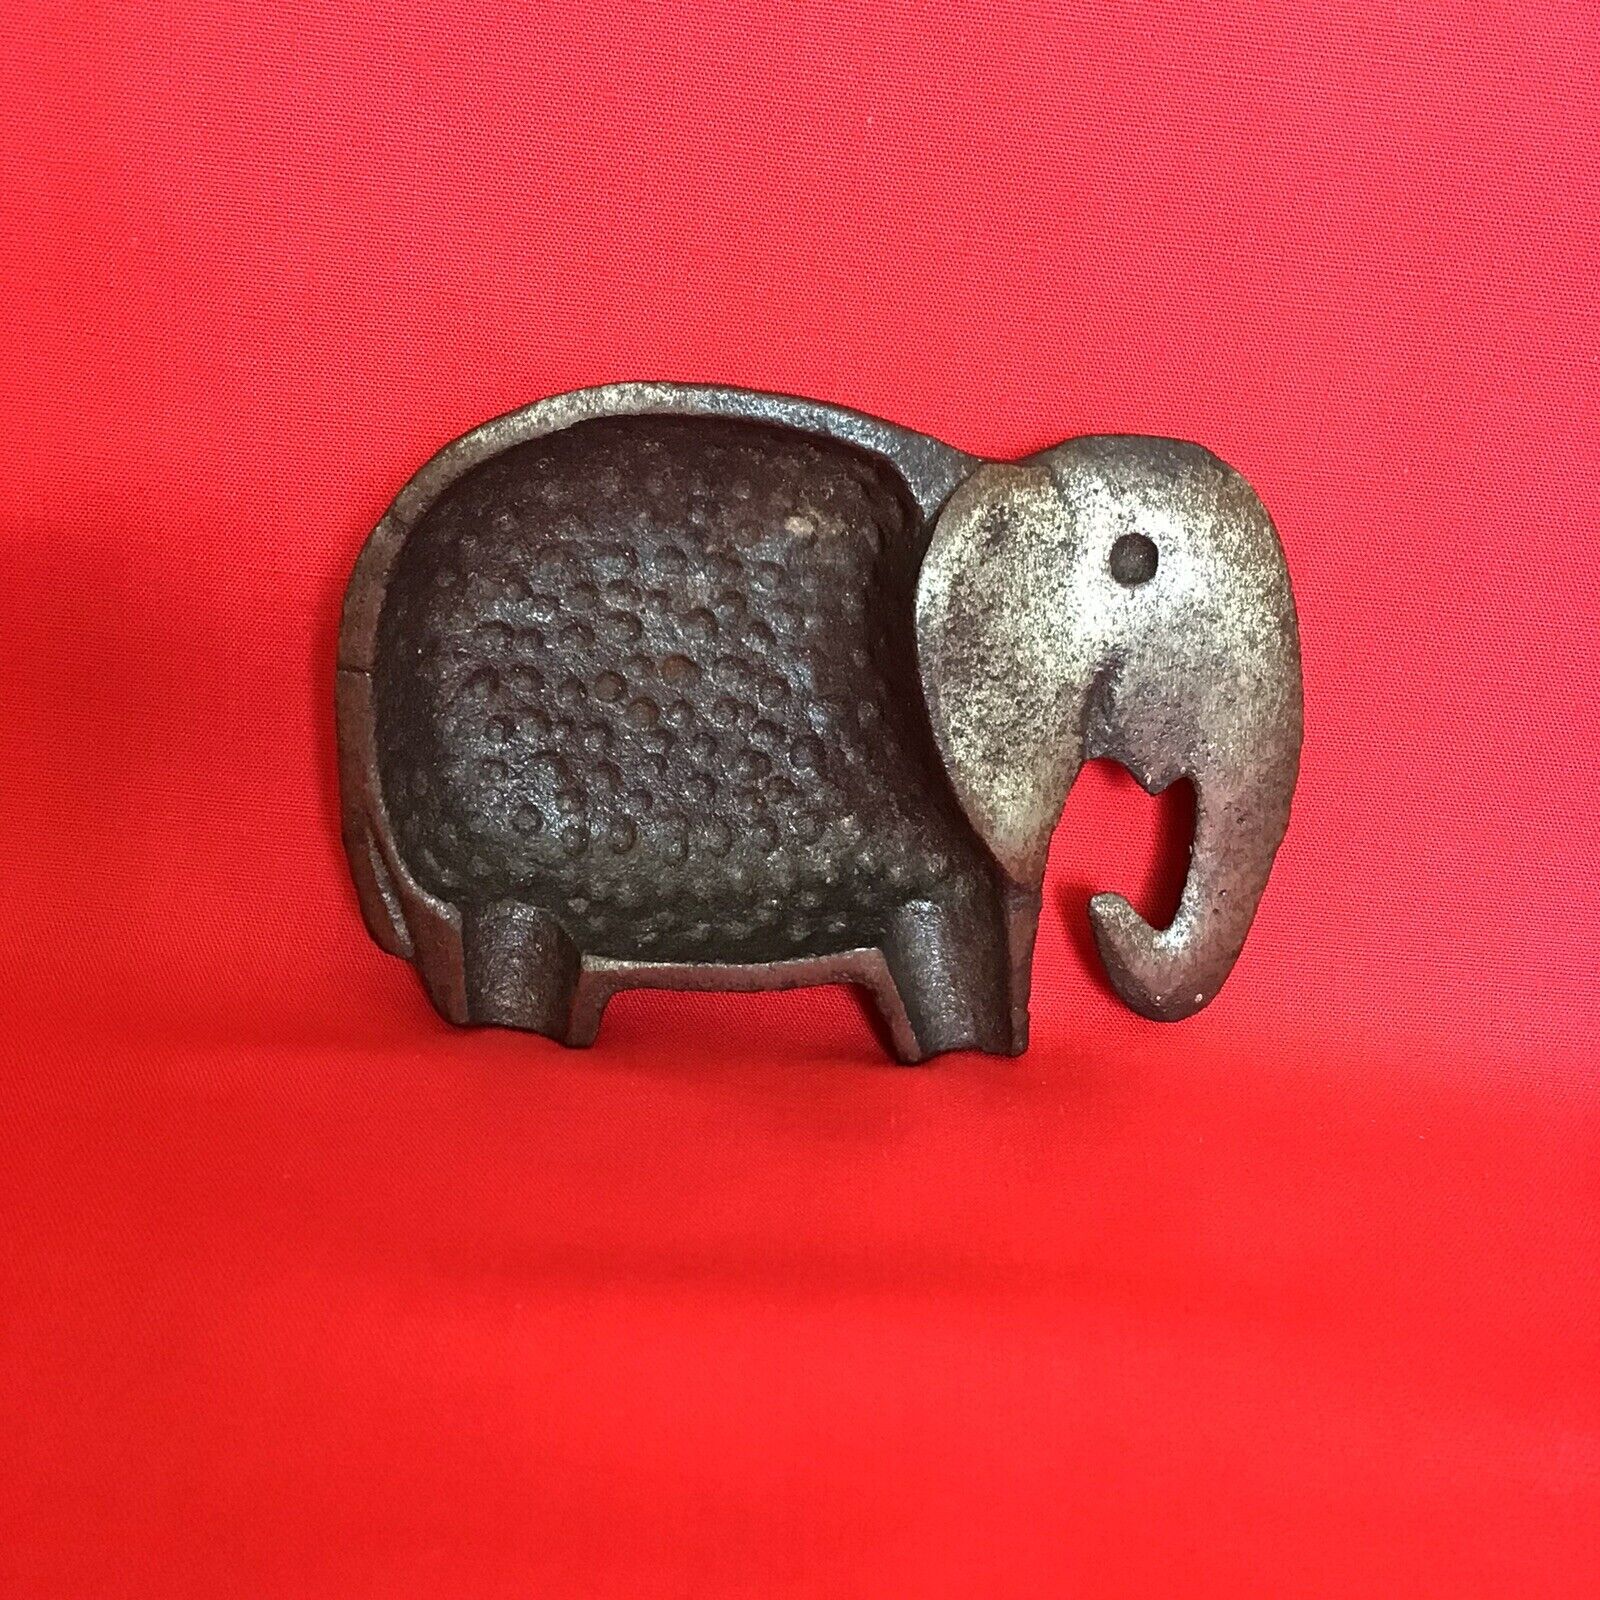 VINTAGE SMALL METAL ELEPHANT CIGARETTE ASHTRAY MADE IN TAIWAN 3.25” x 2.25”